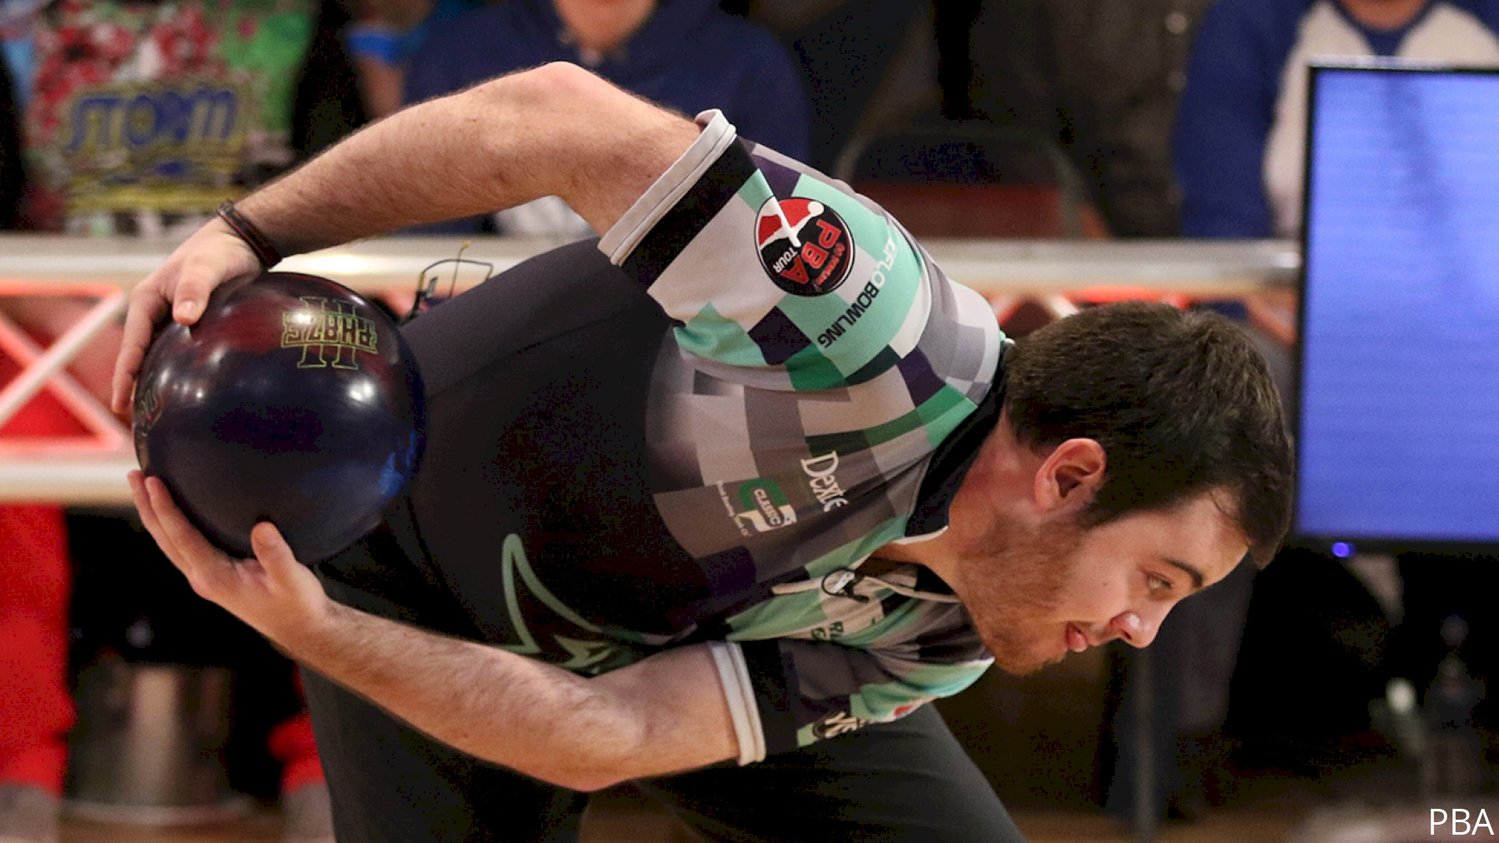 Two-handed bowler Anthony Simonsen shows the style that won him the 2022 U.S. Masters championship.